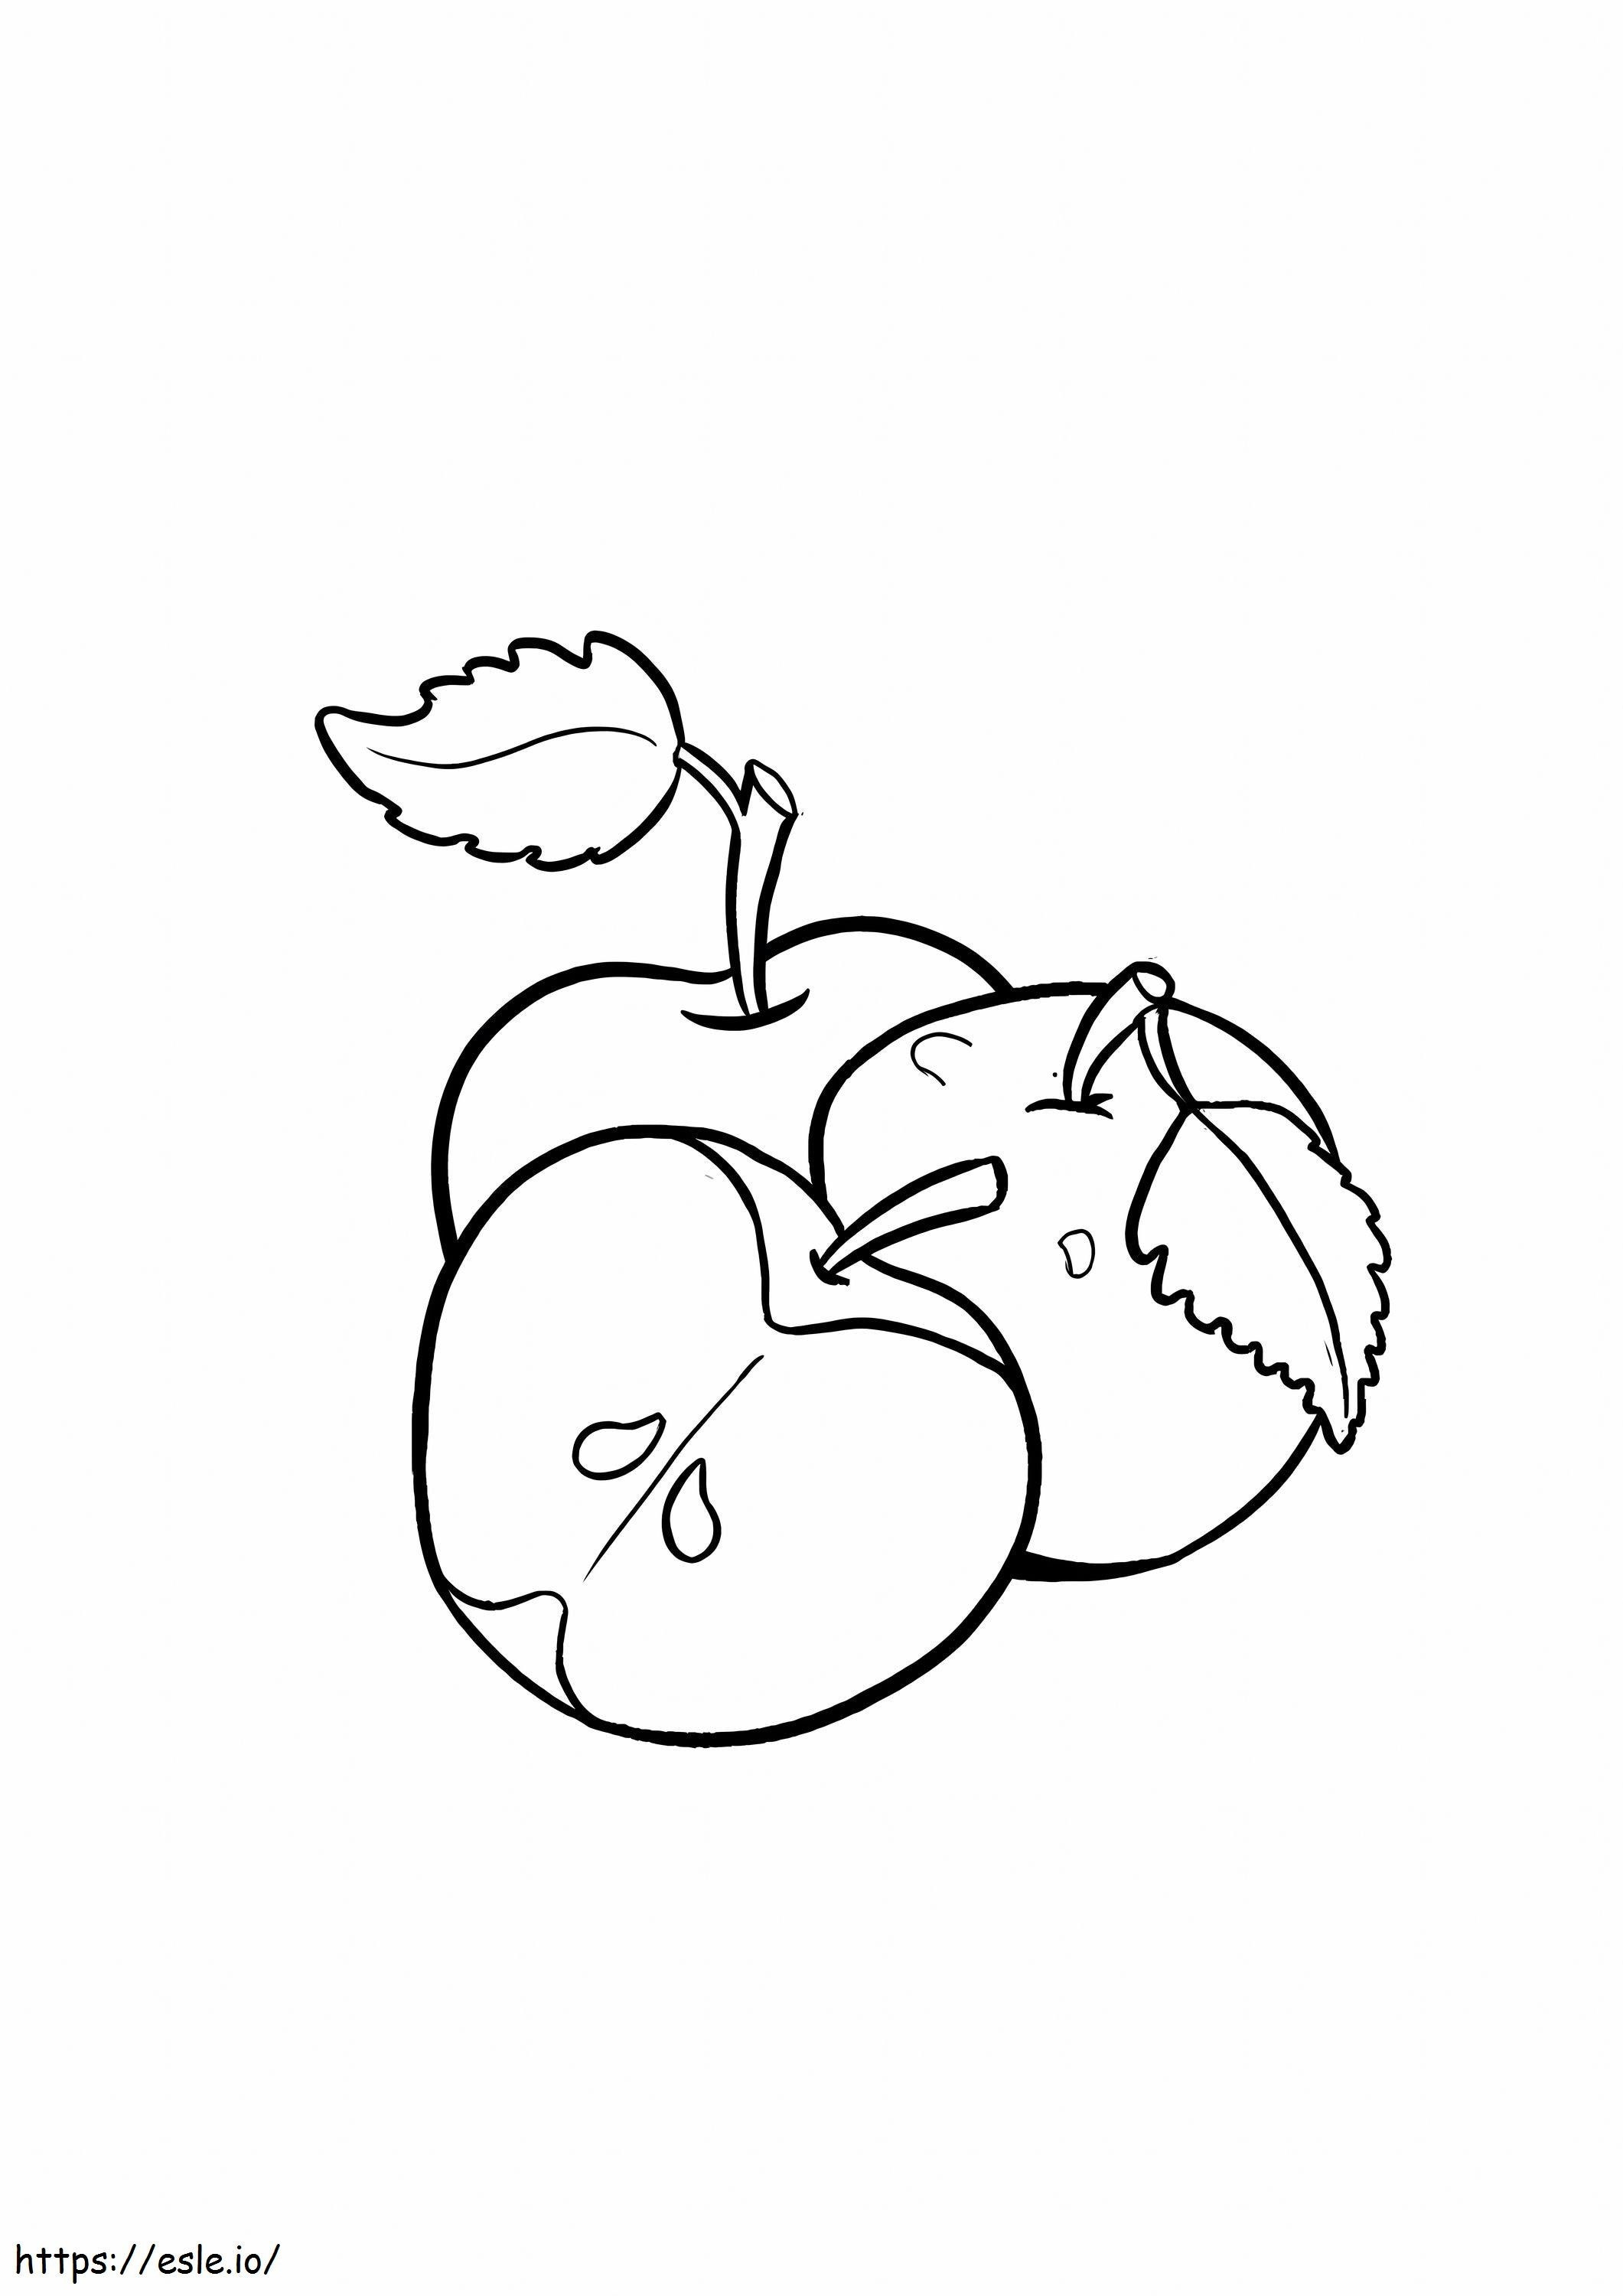 Two Apples With Apple Slices coloring page